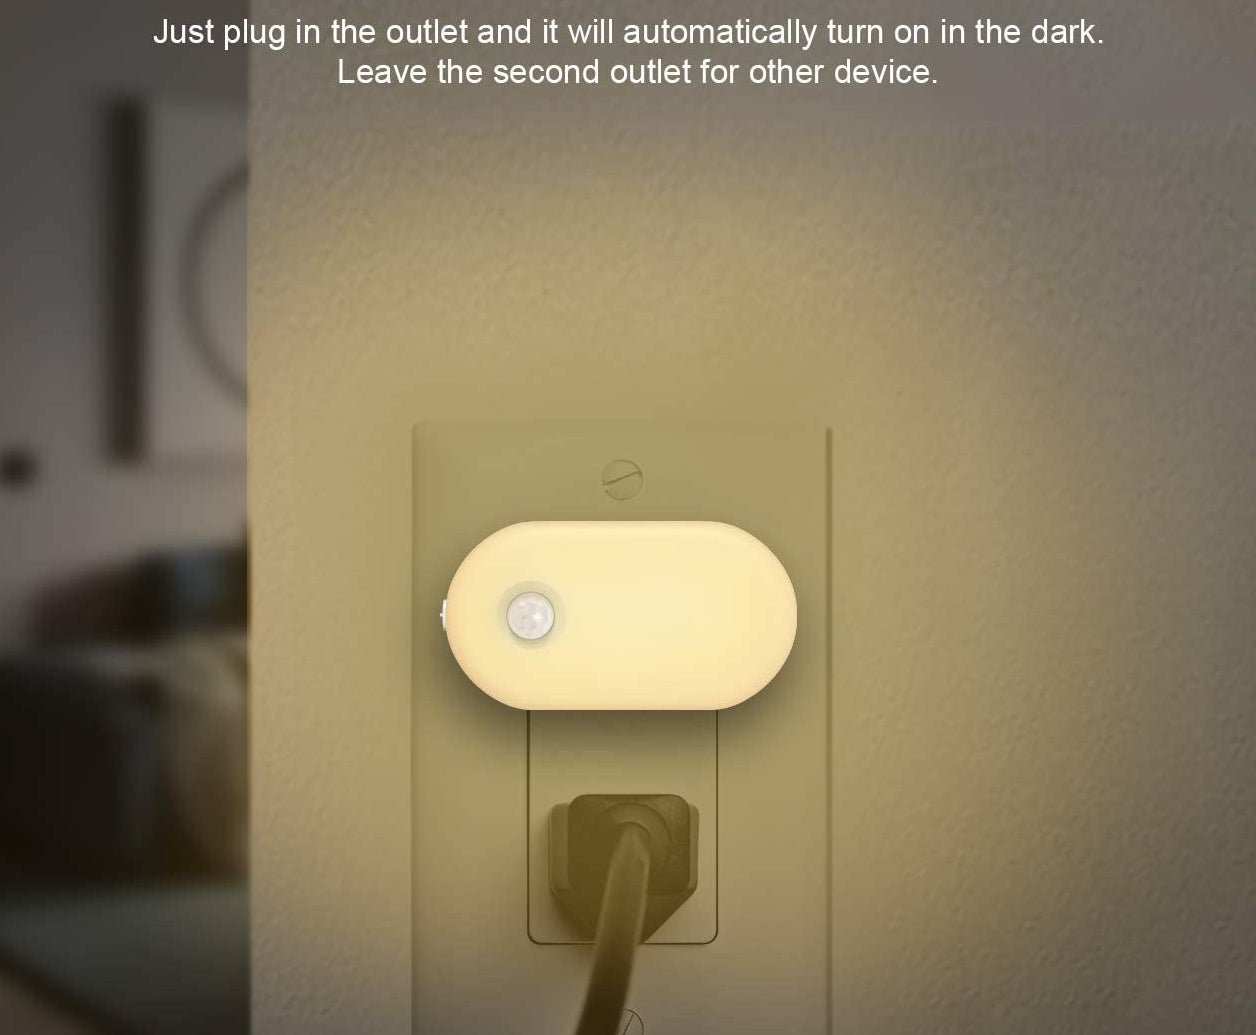 The motion sensor night light plugged into an AC outlet